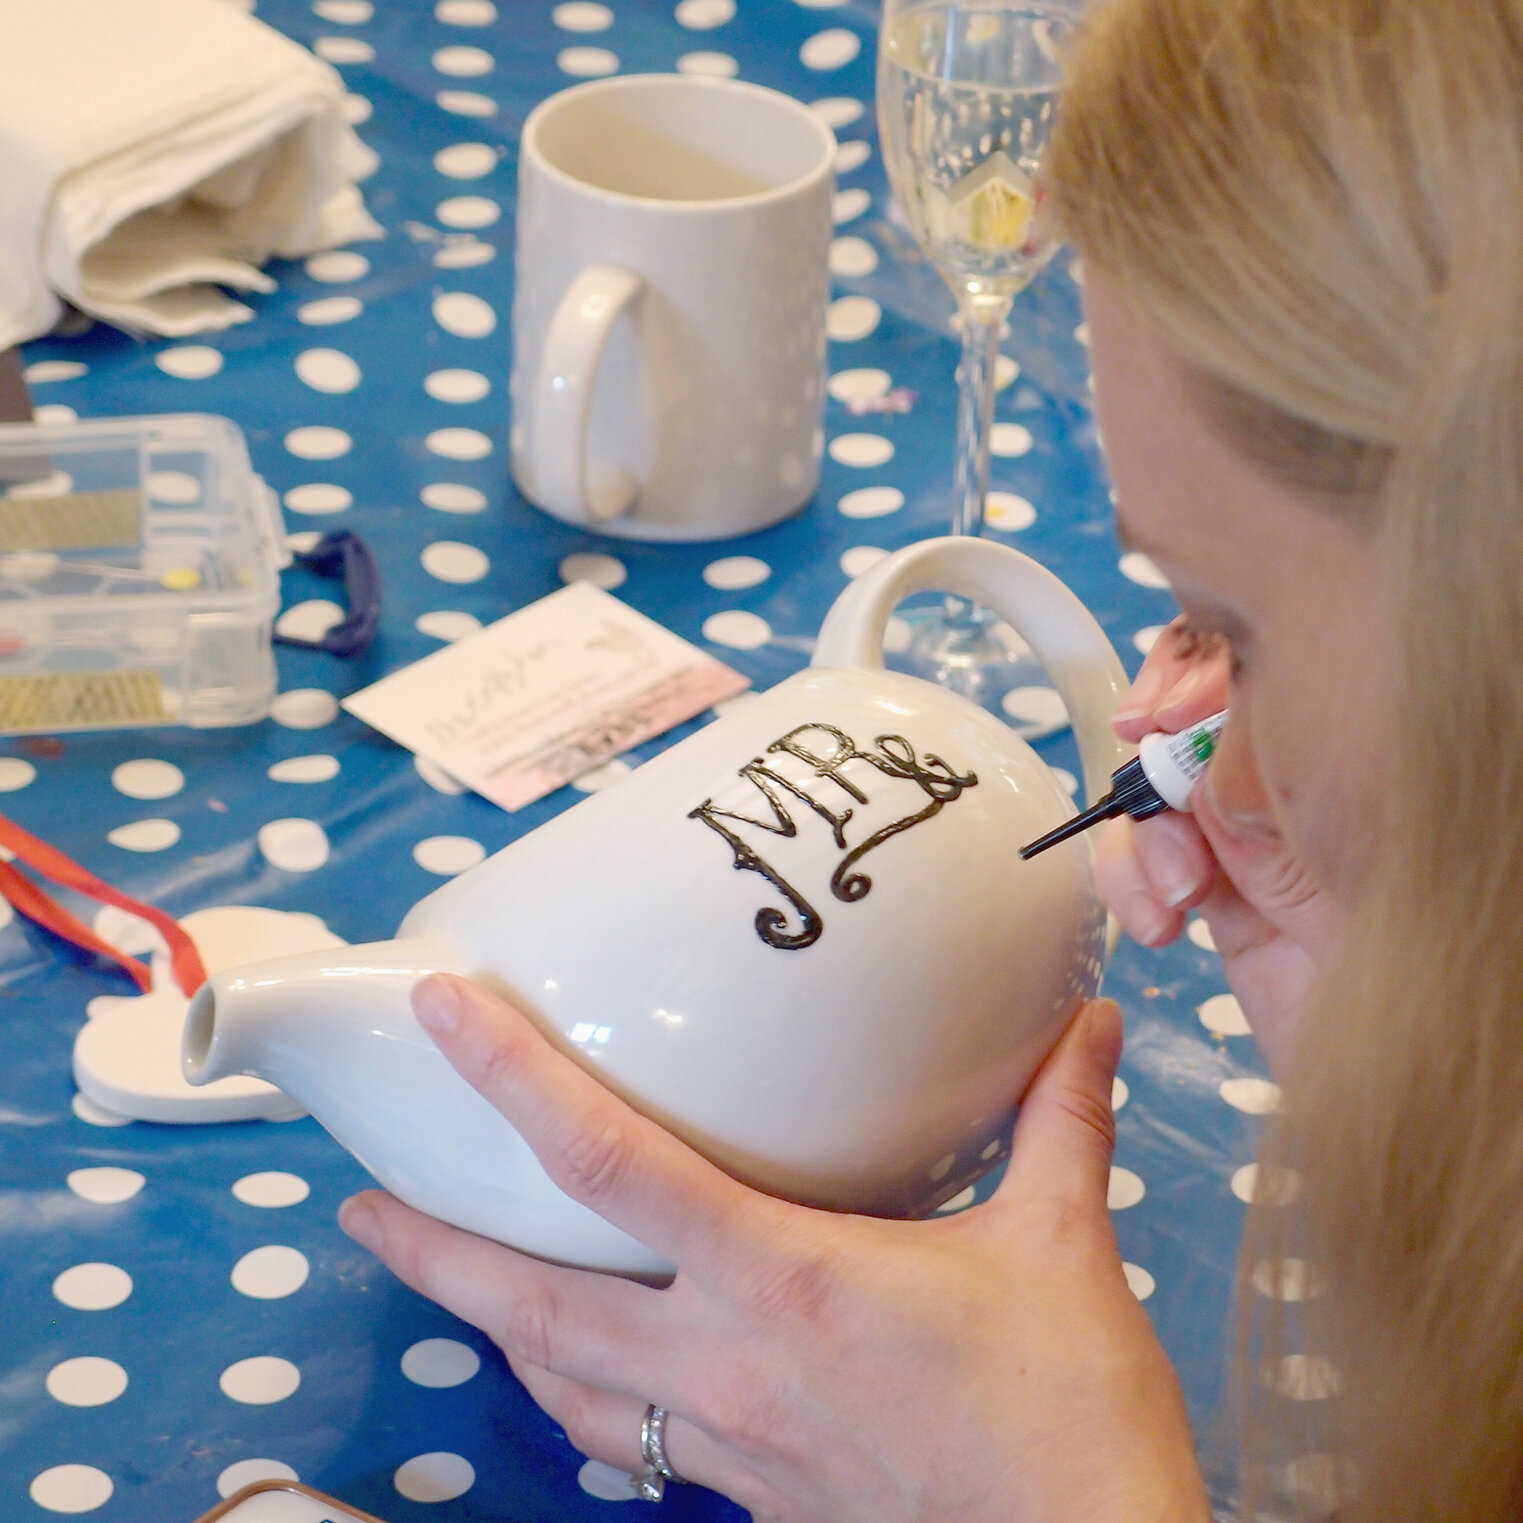 Mobile Ceramic Painting Pottery Workshop Hen Party Brighton.jpg